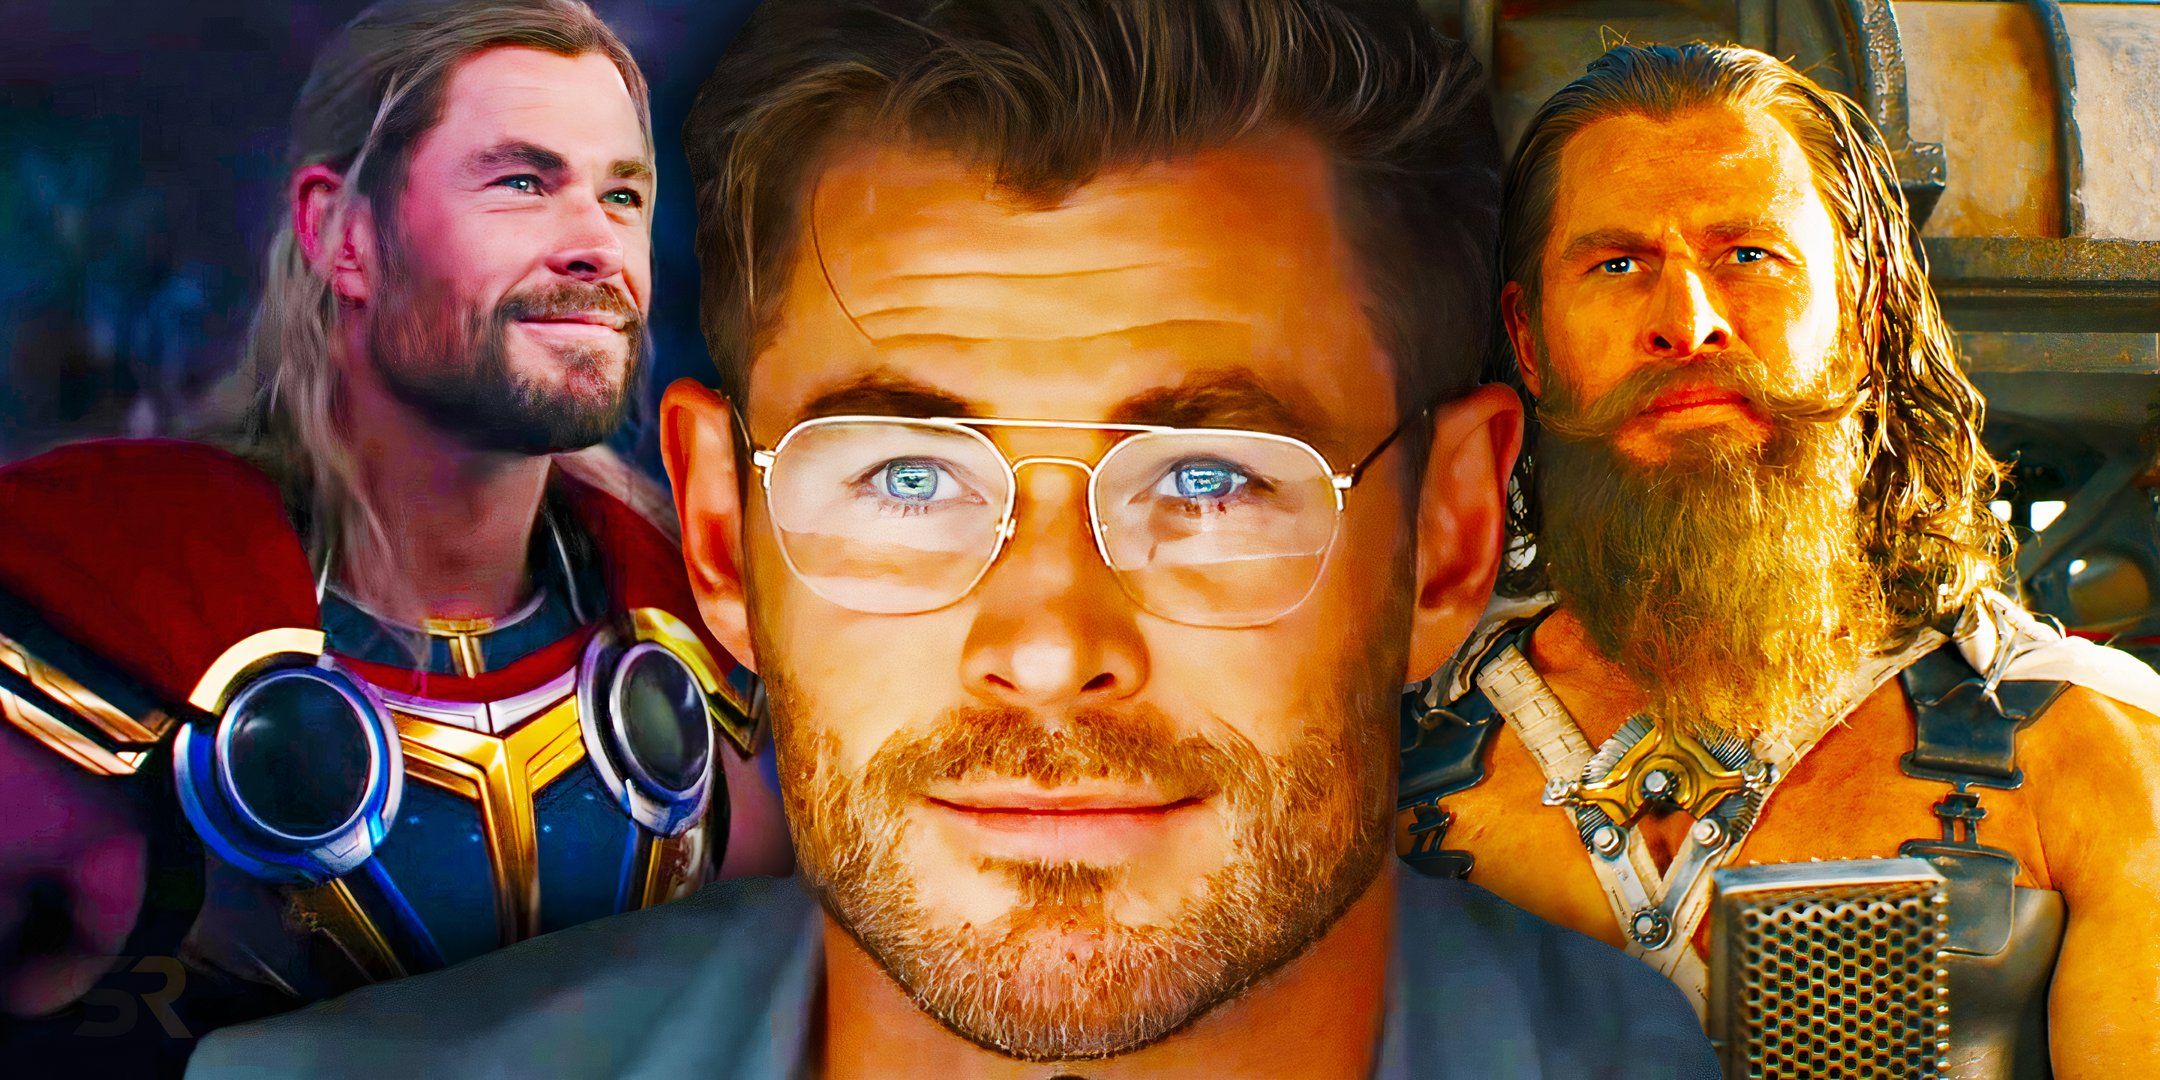 1 Upcoming Chris Hemsworth Movie Not Happening Means The MCU Actor Has Dodged A Massive Career Bullet